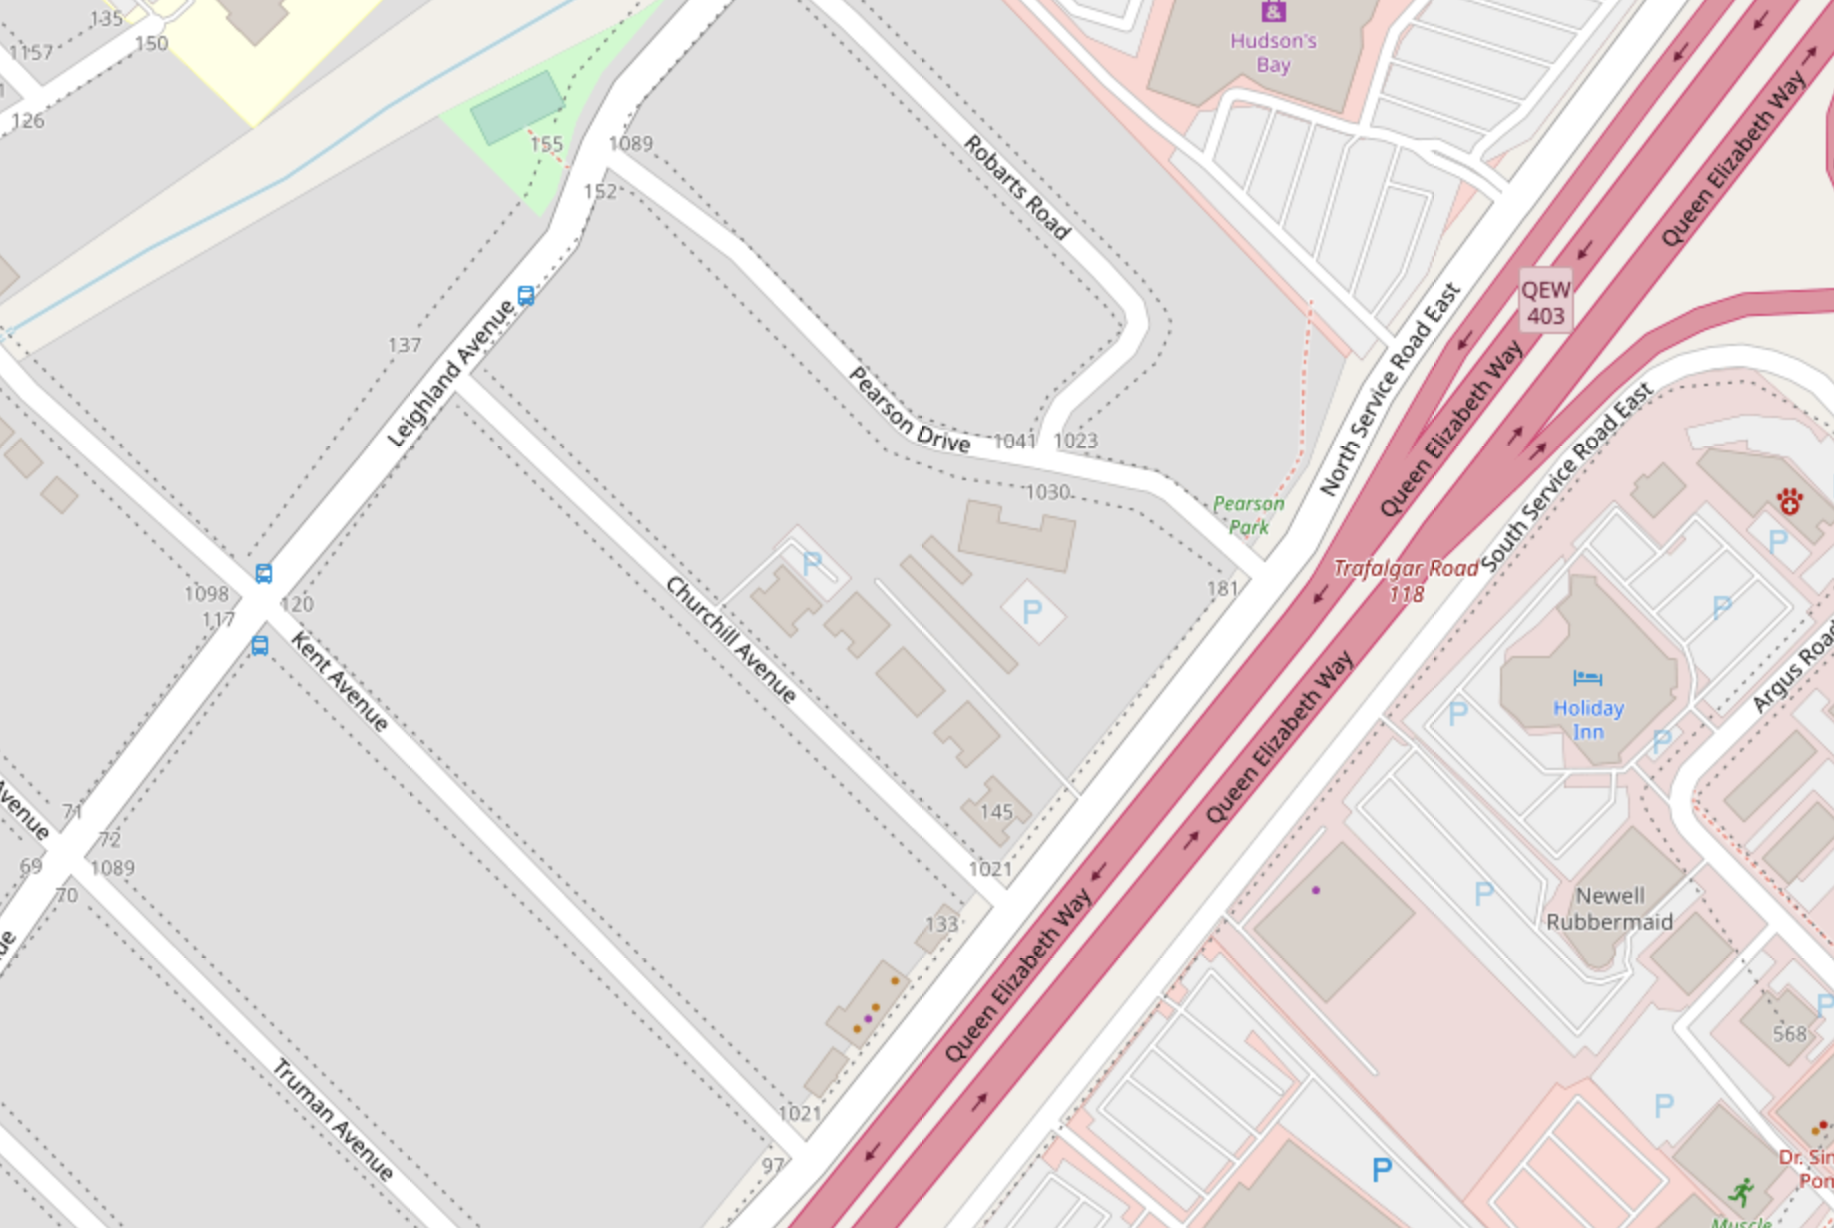 North Service Road and Churchill Ave | Openstreetmap